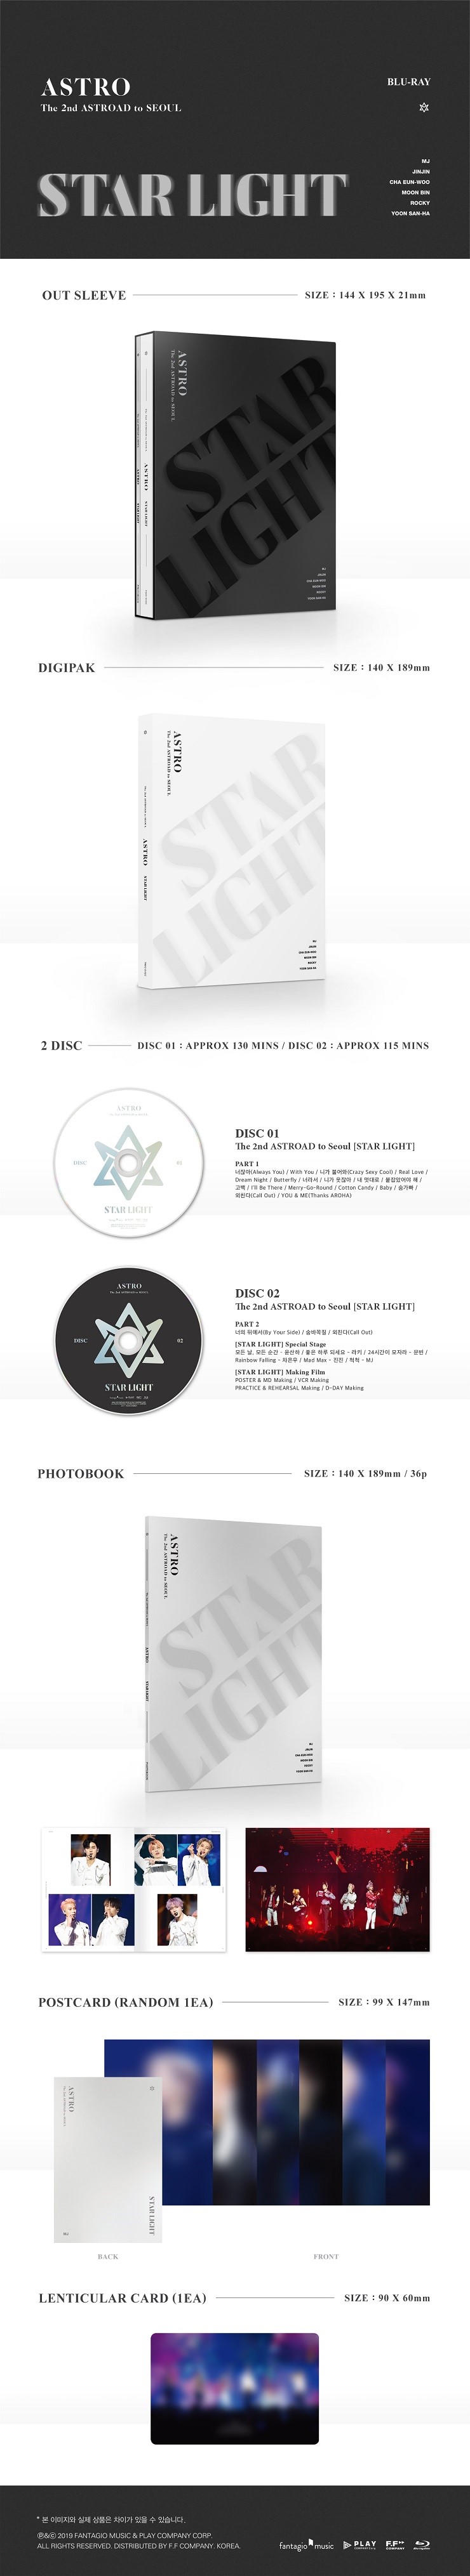 ASTRO - The 2nd ASTROAD to Seoul STAR LIGHT Blu-ray | Music Korea 